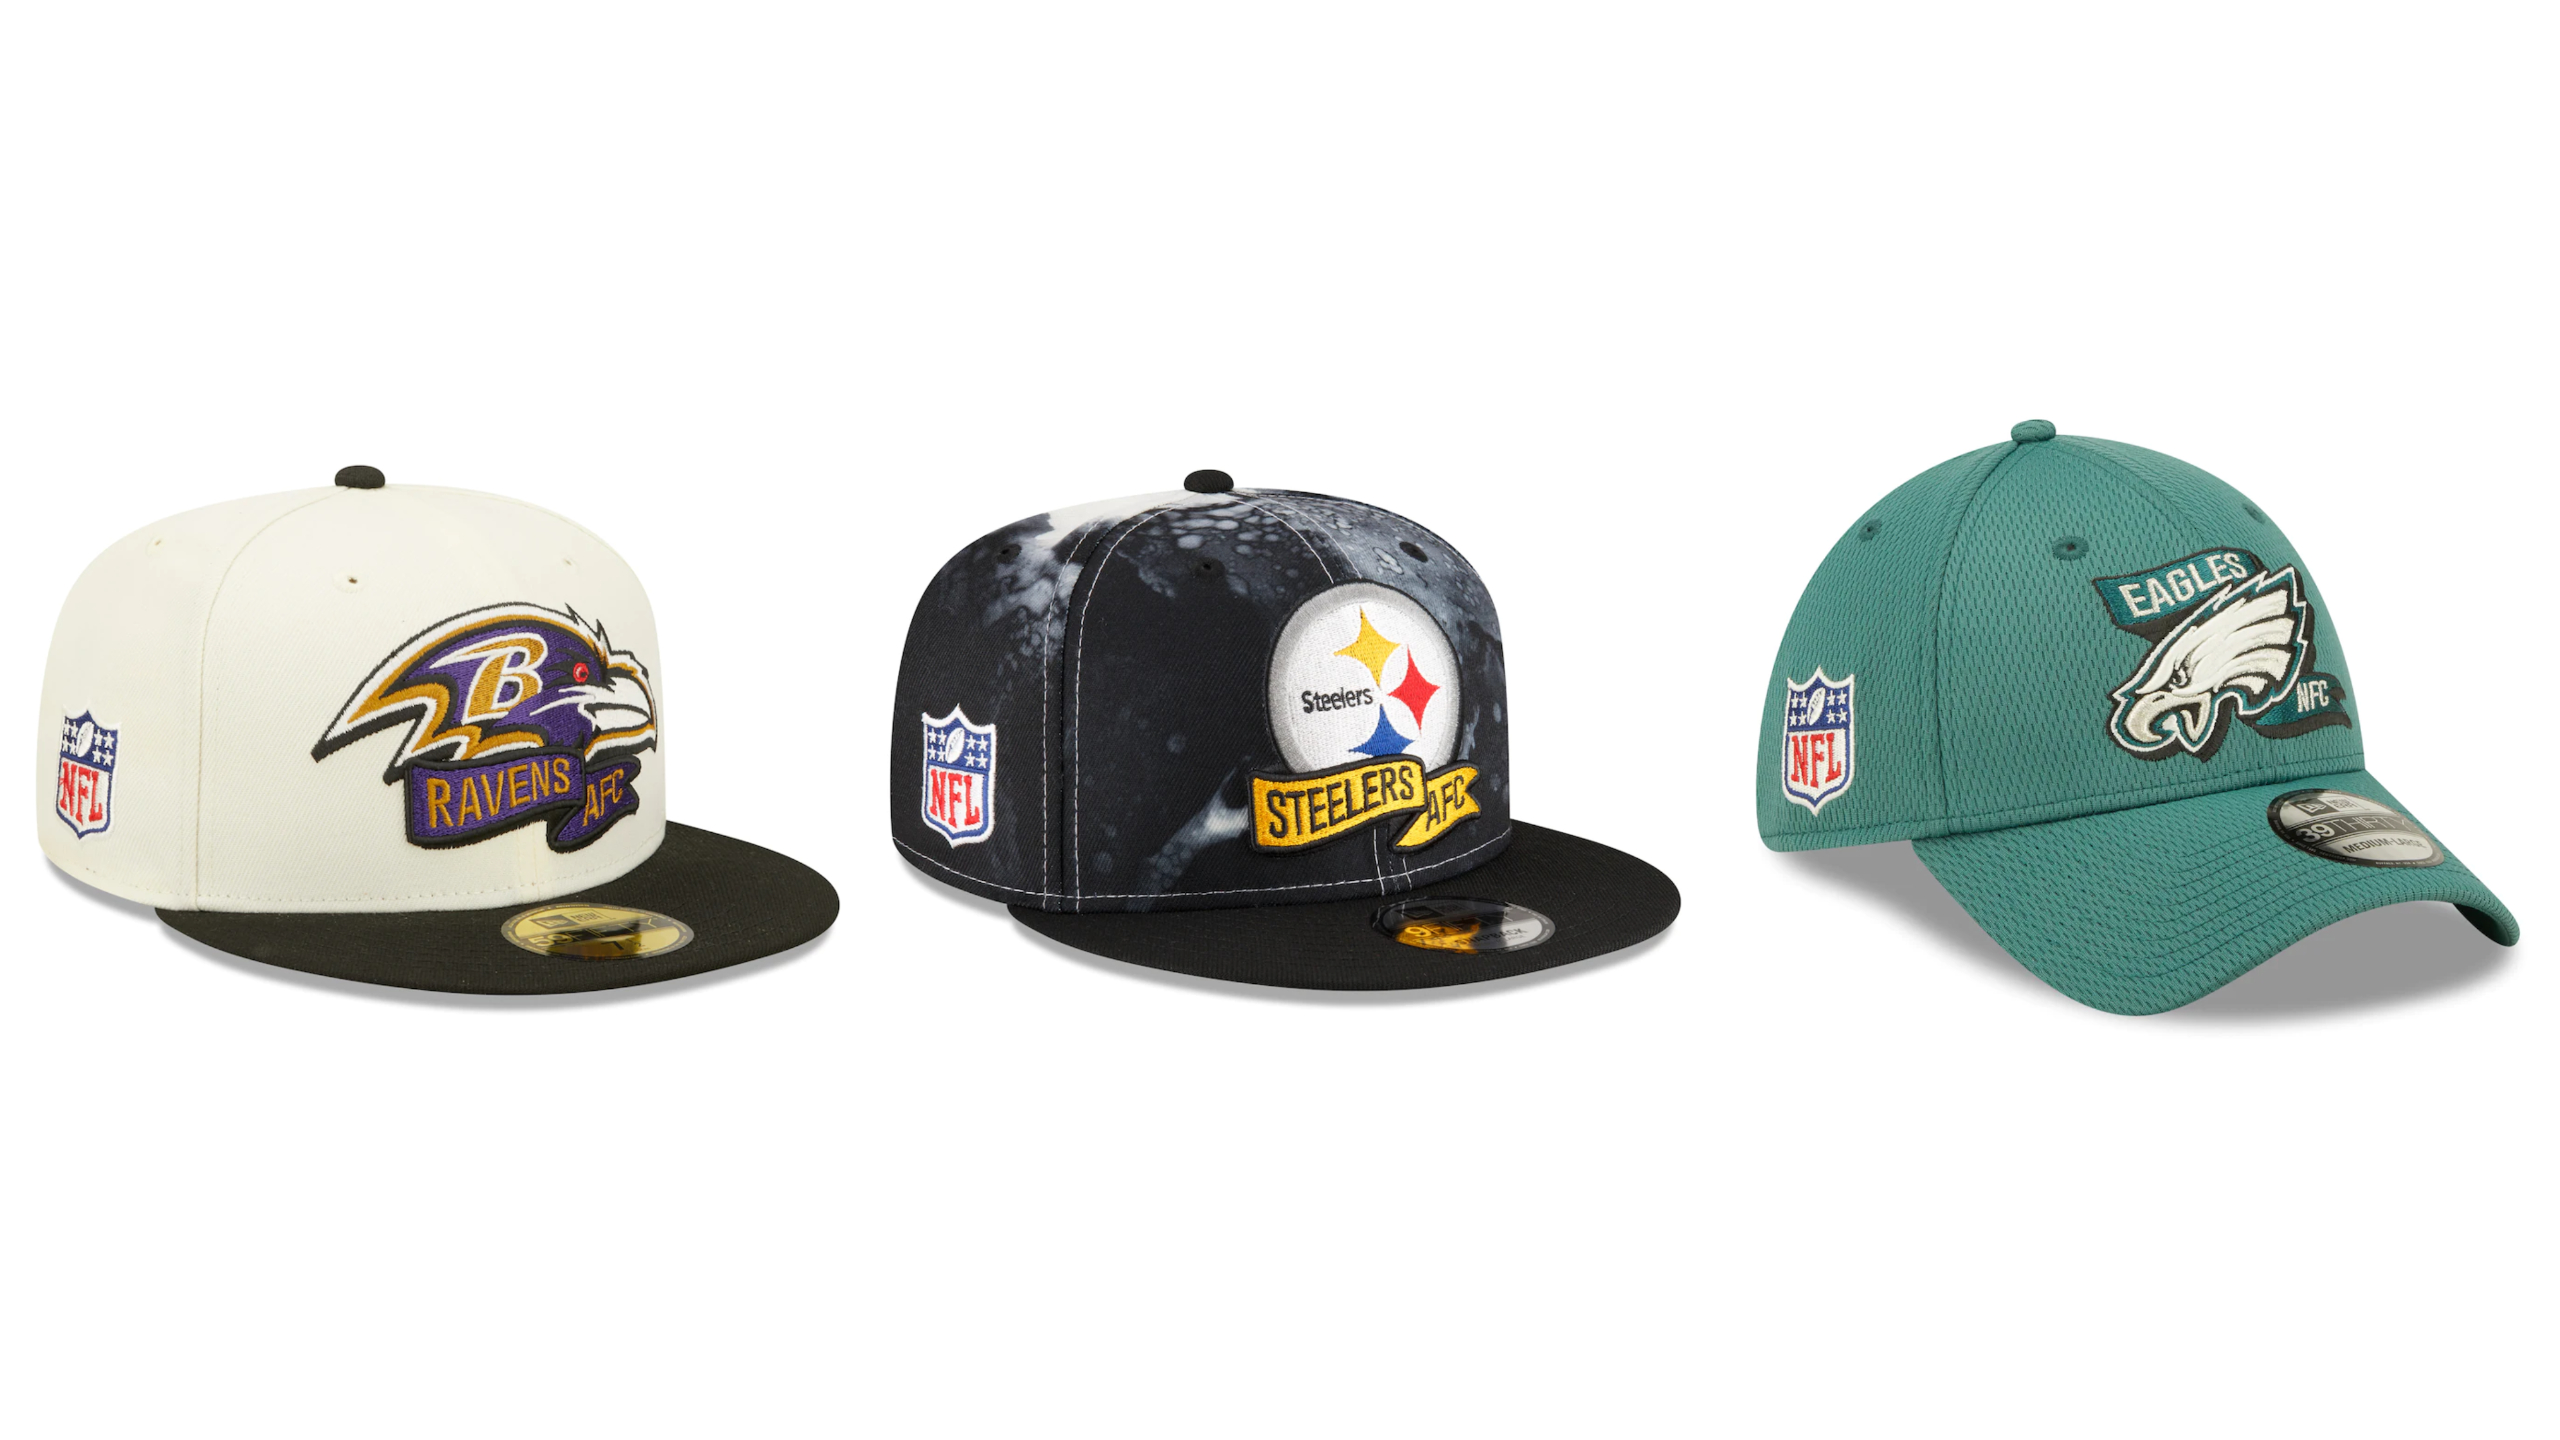 nfl sideline hats by year